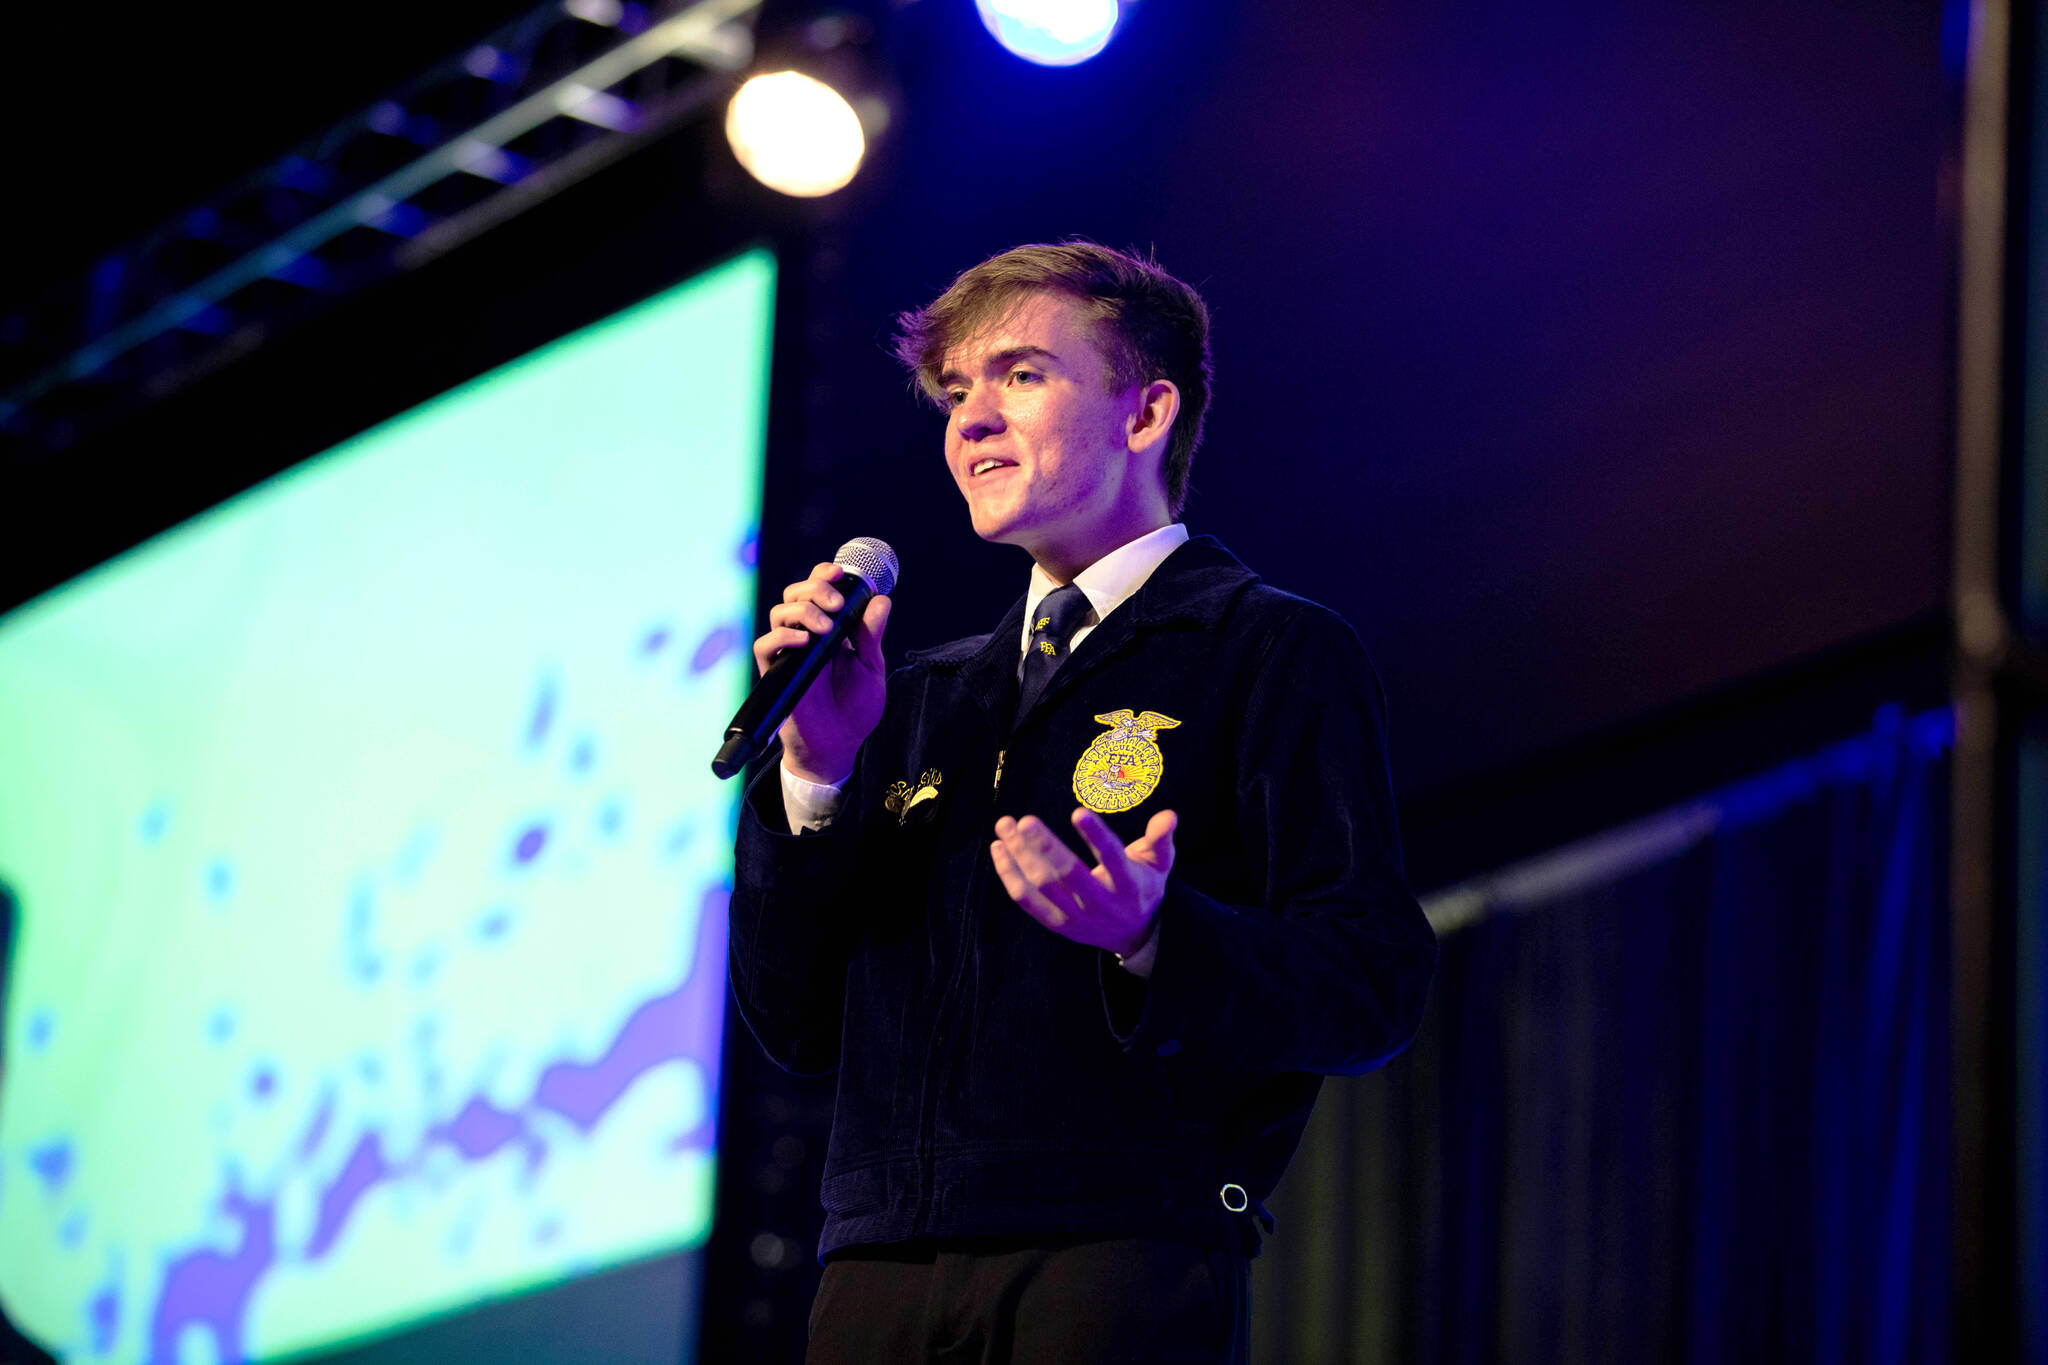 Photo Courtesy of Elma High School 
Samuel Gillis gives a speech after being elected Washington Future Farmers of America Association President at Three Rivers Convention Center on May 14, 2022, in Kennewick.